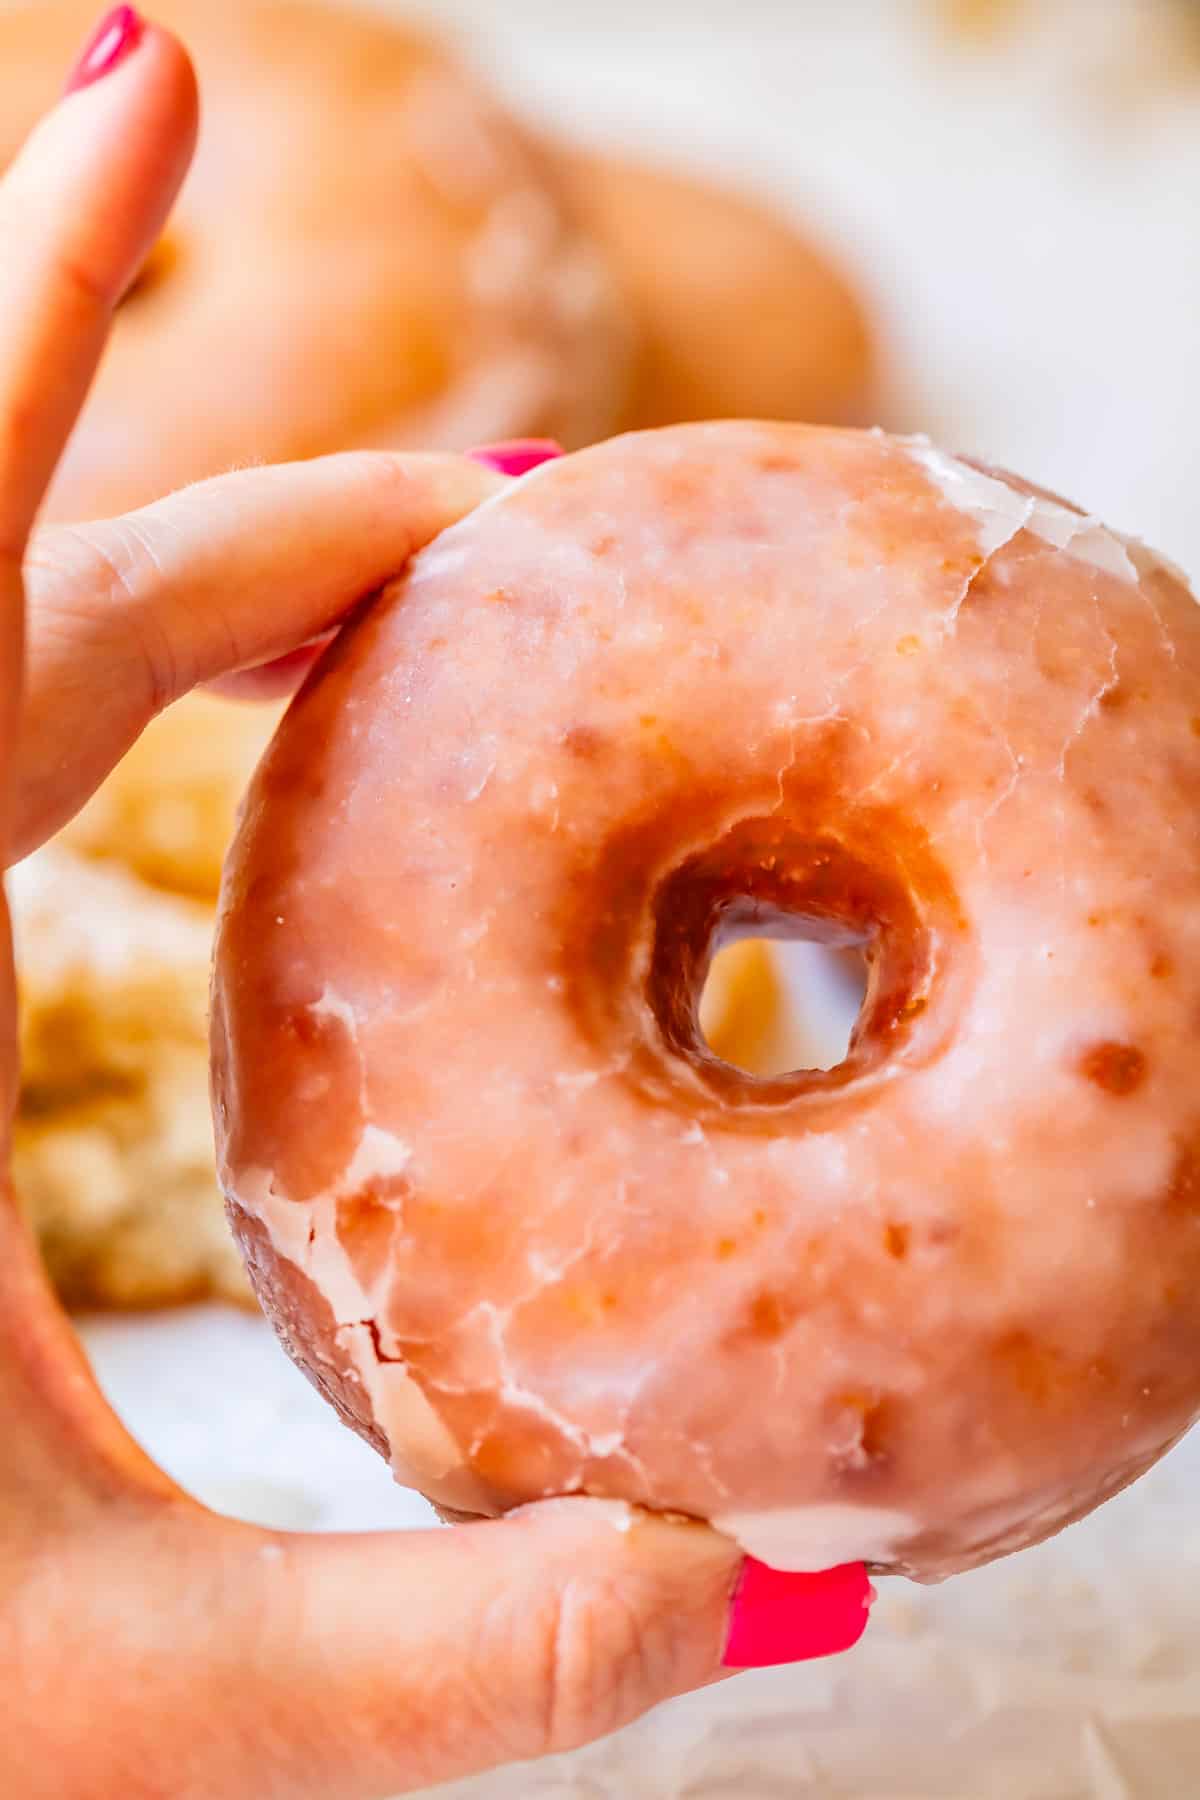 a hand holding up a perfectly glazed from scratch donut so you can see through the hole.